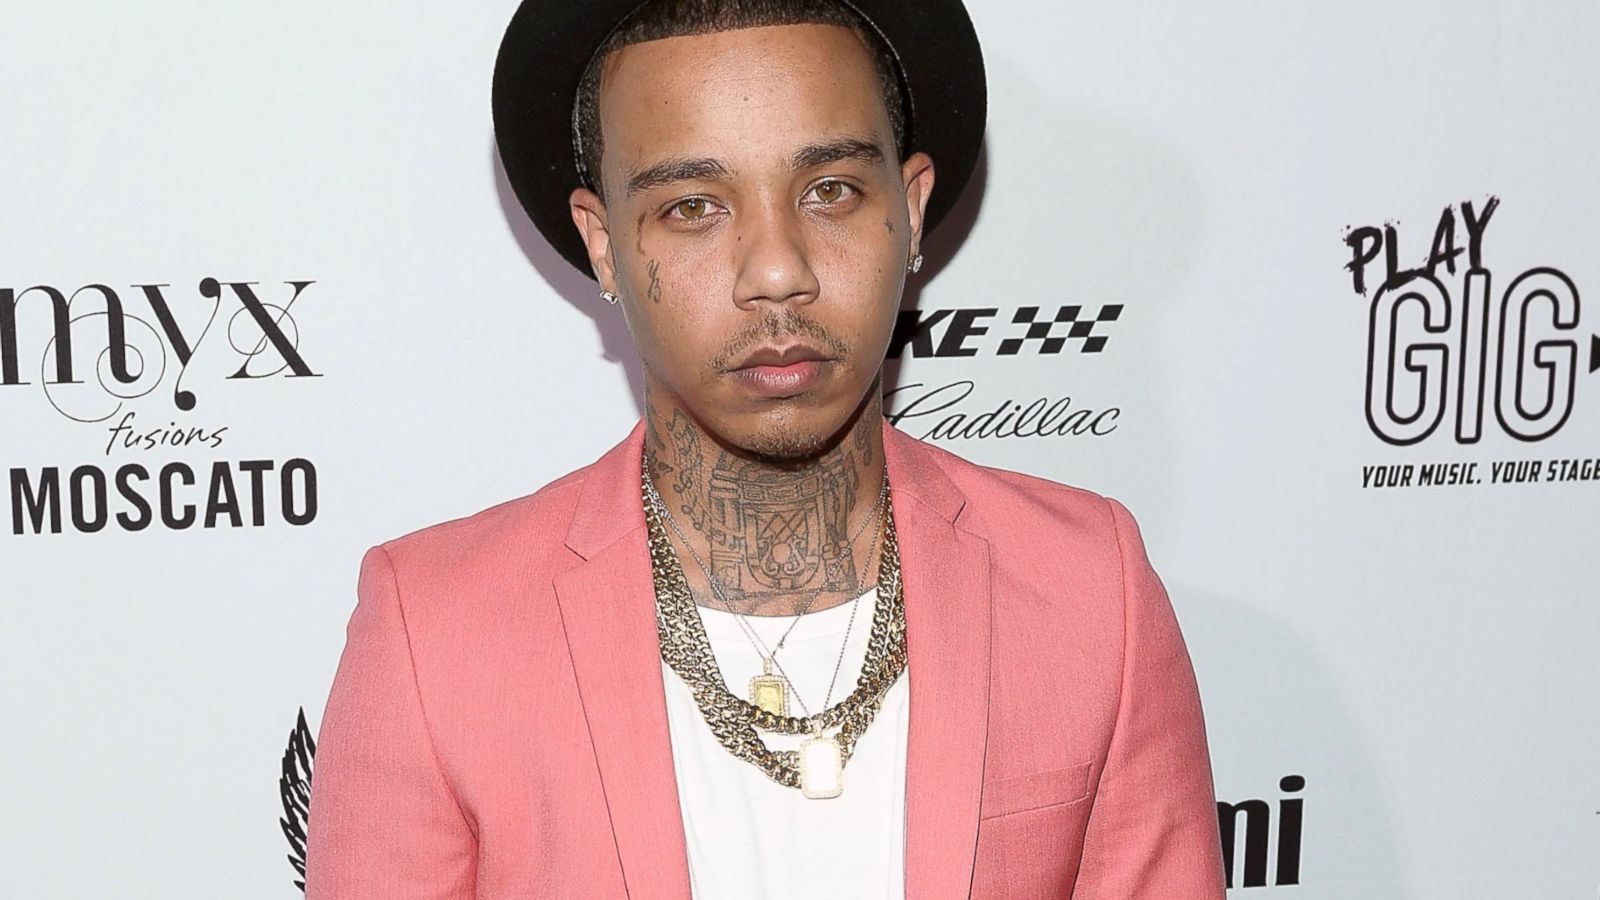 Yung Berg wearing a pink suit